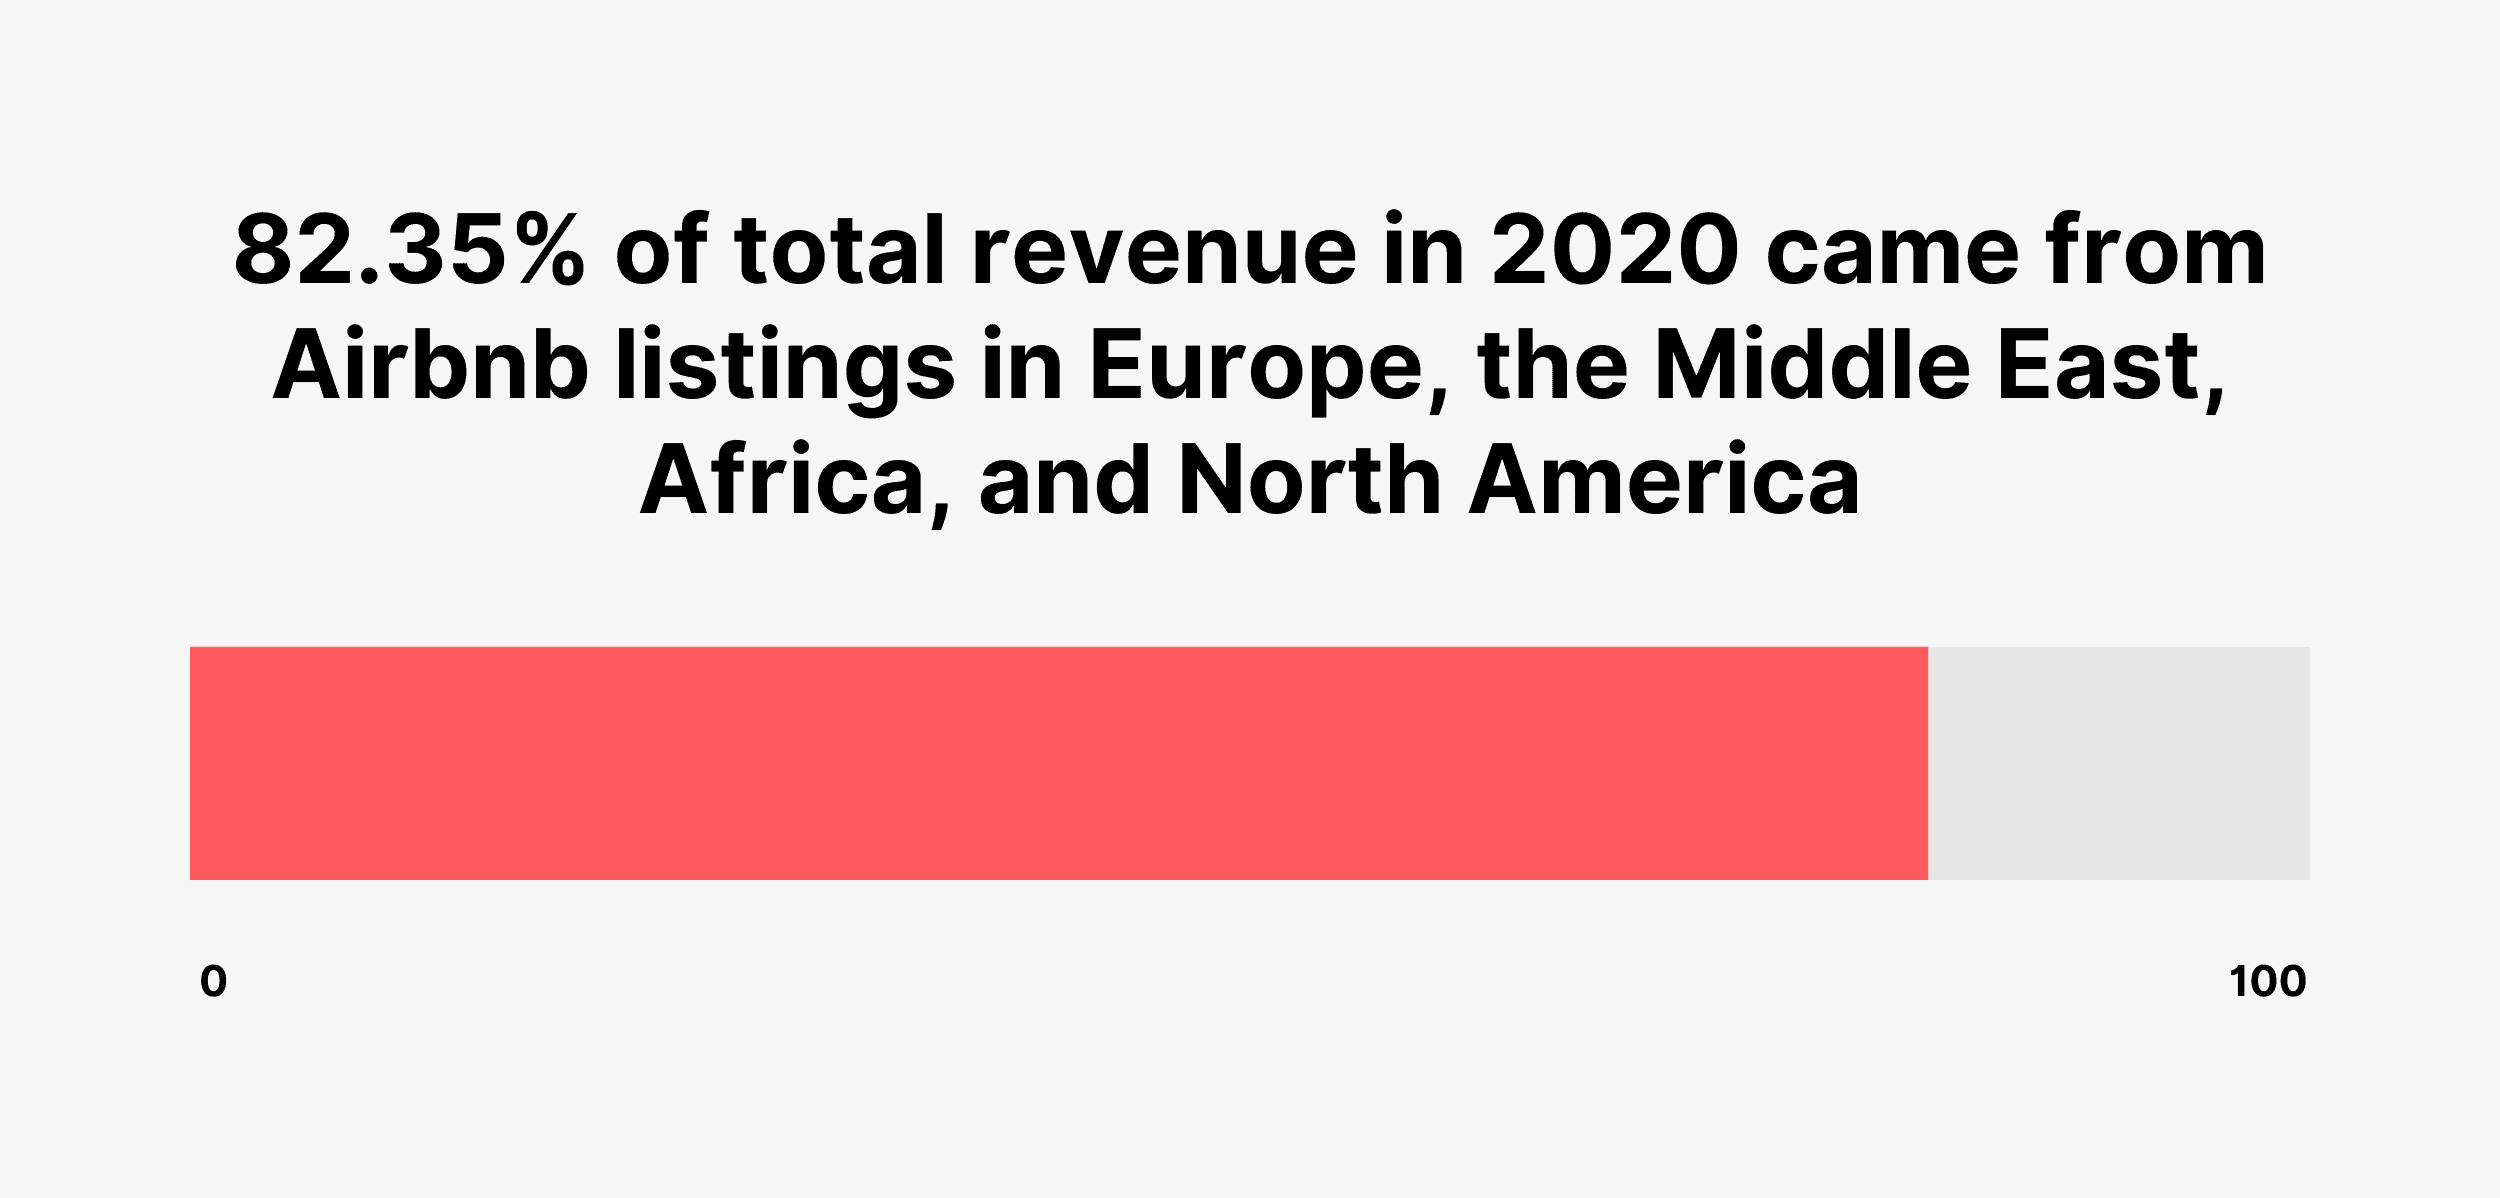 82.35% of total revenue in 2020 came from Airbnb listings in Europe, the Middle East, Africa, and North America